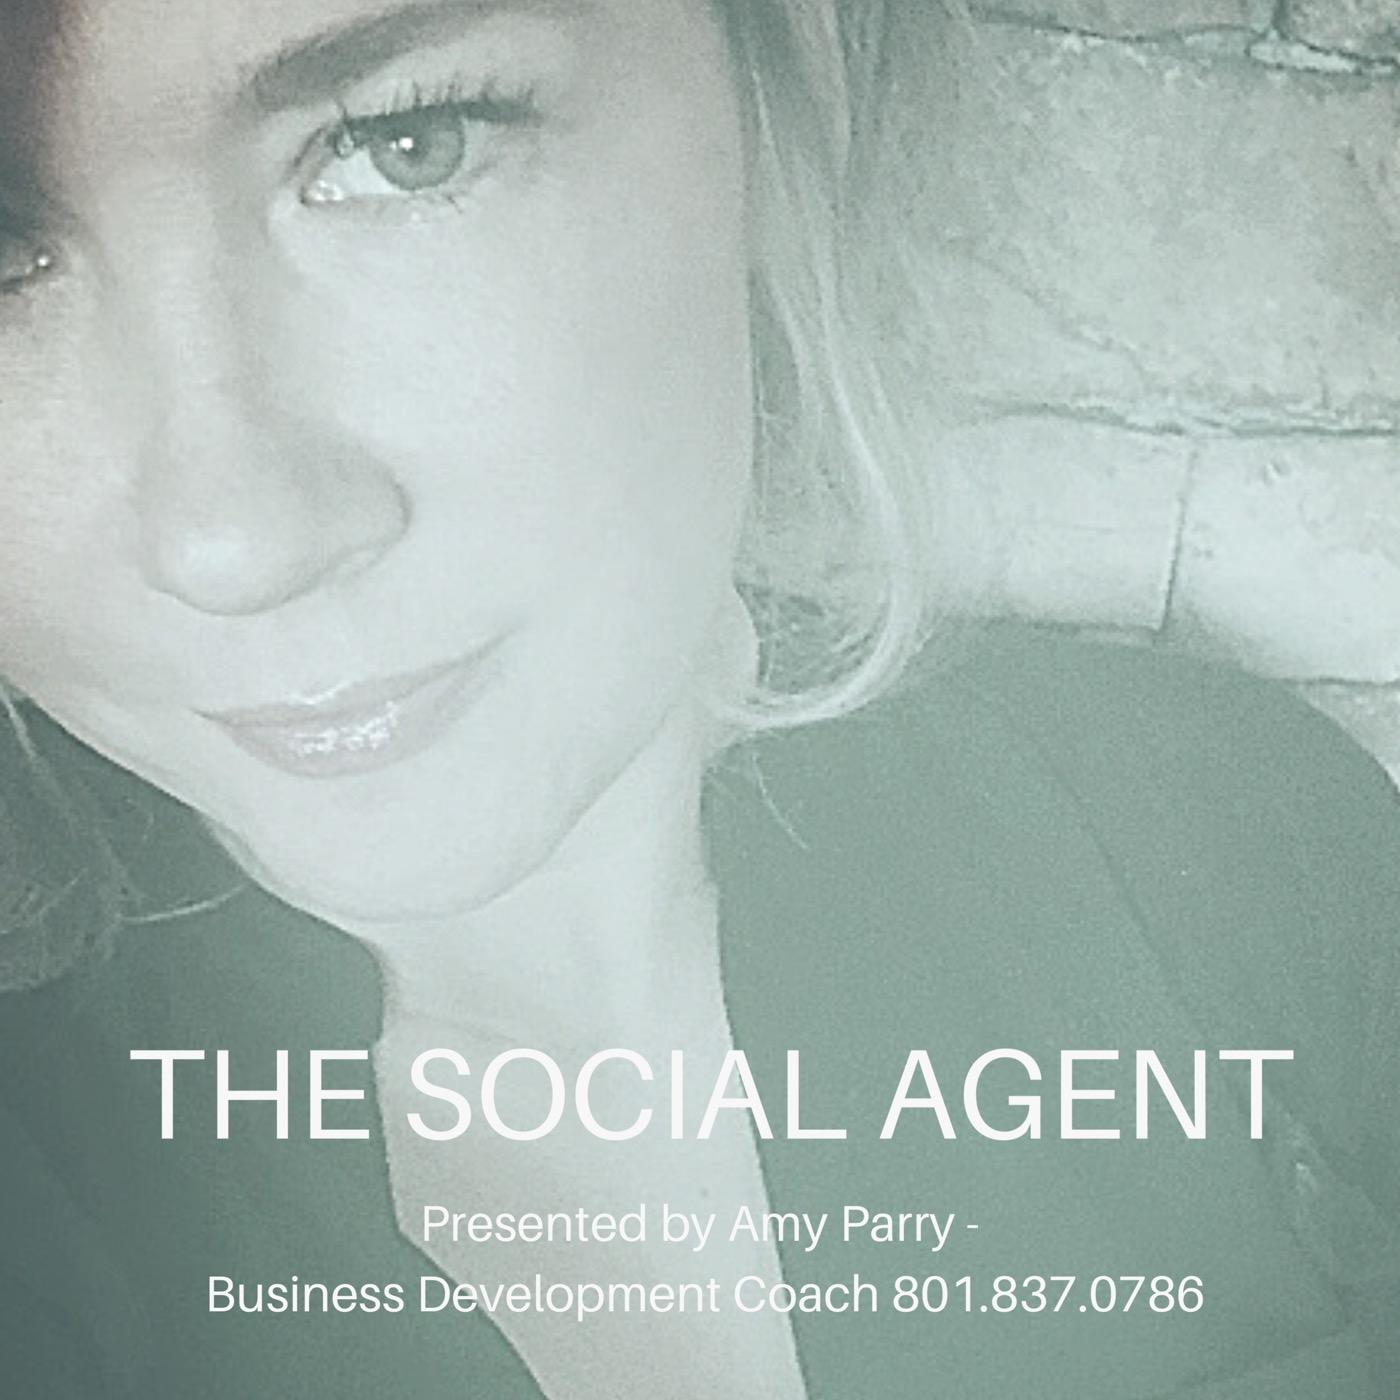 The Social Agent